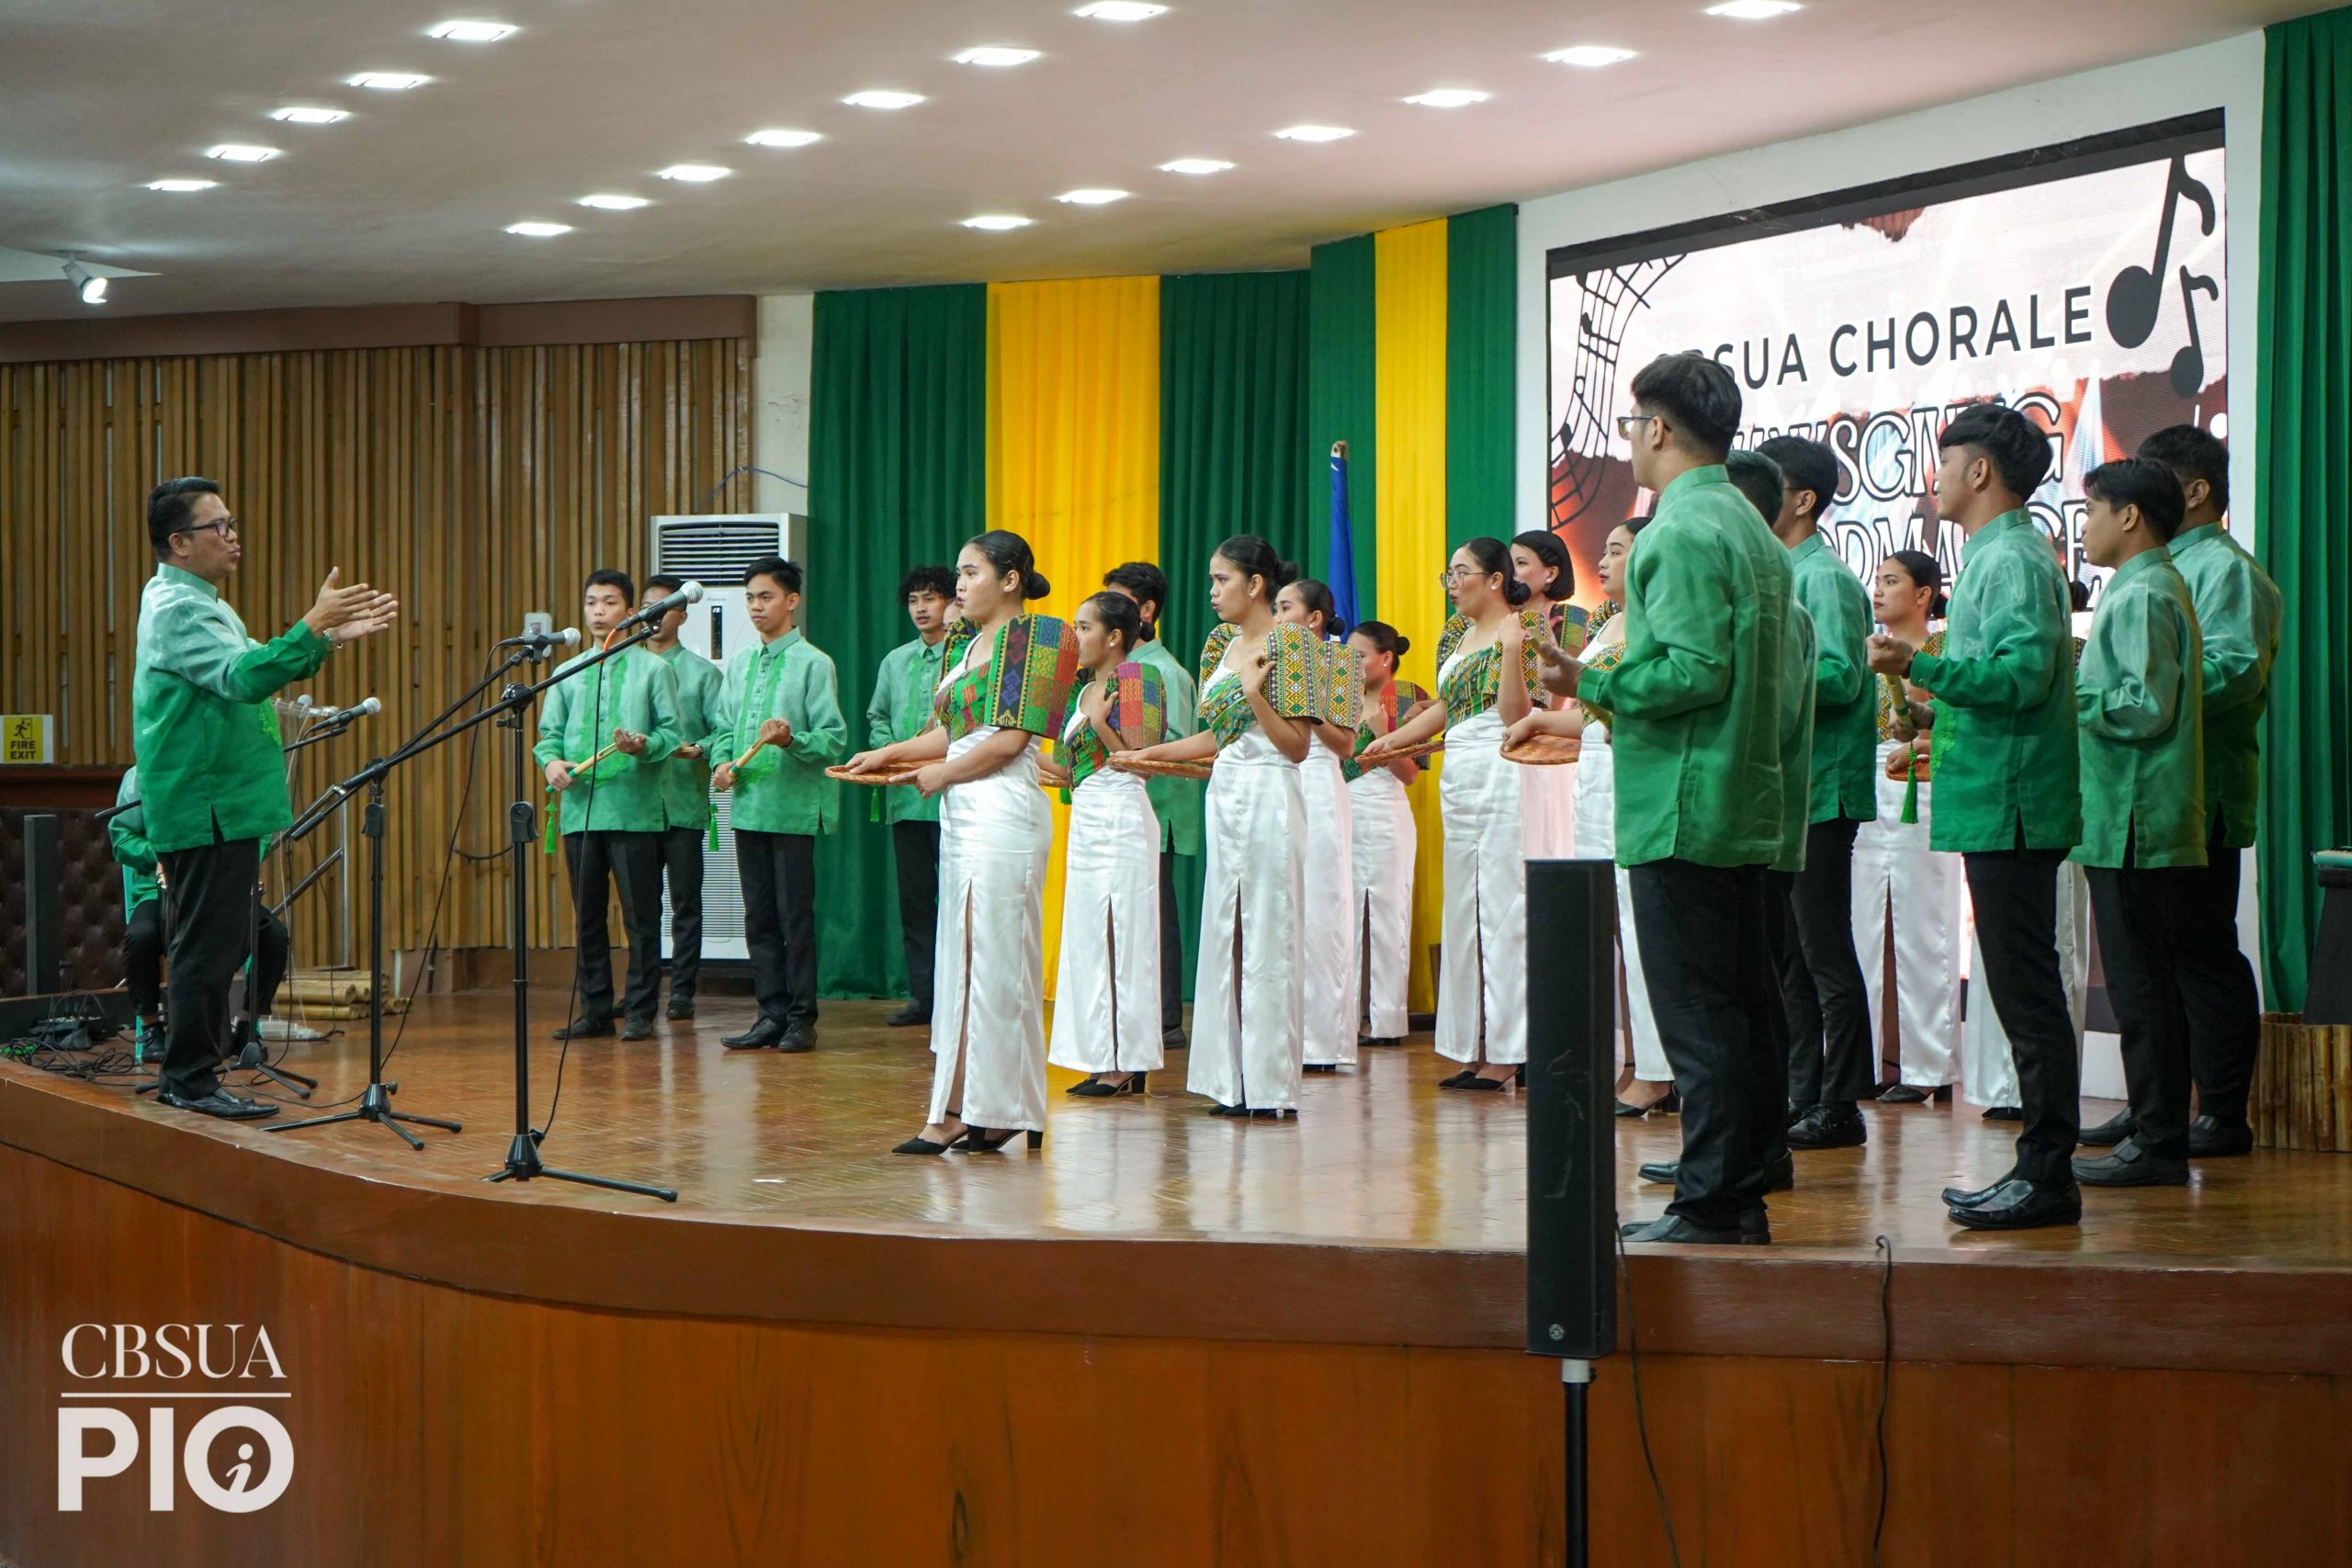 CBSUA CHORALE GRACES THE STATEANS WITH A THANKSGIVING PERFORMANCE